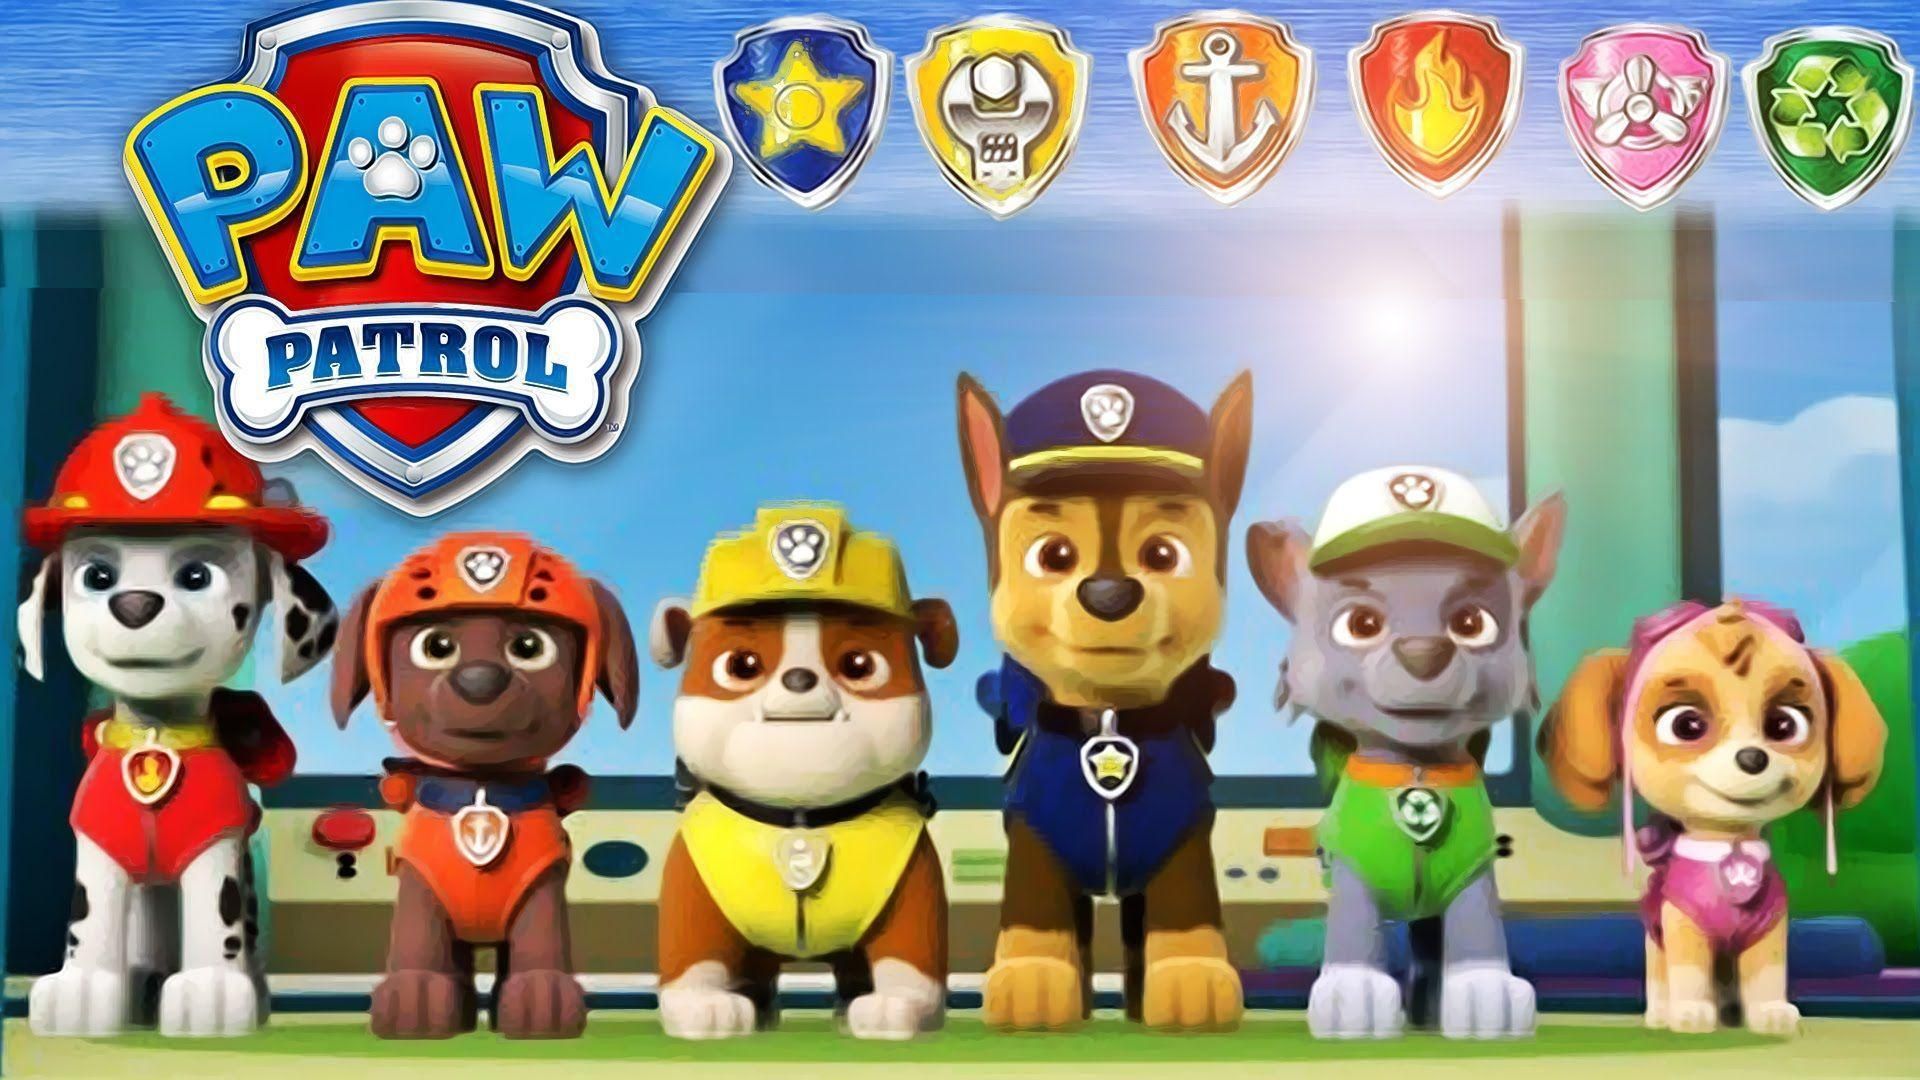 Visit our children's channel Dog TV. Teach children basic colors, matching colors, numbers. Inspire th. Paw patrol, Paw patrol birthday, Chase paw patrol